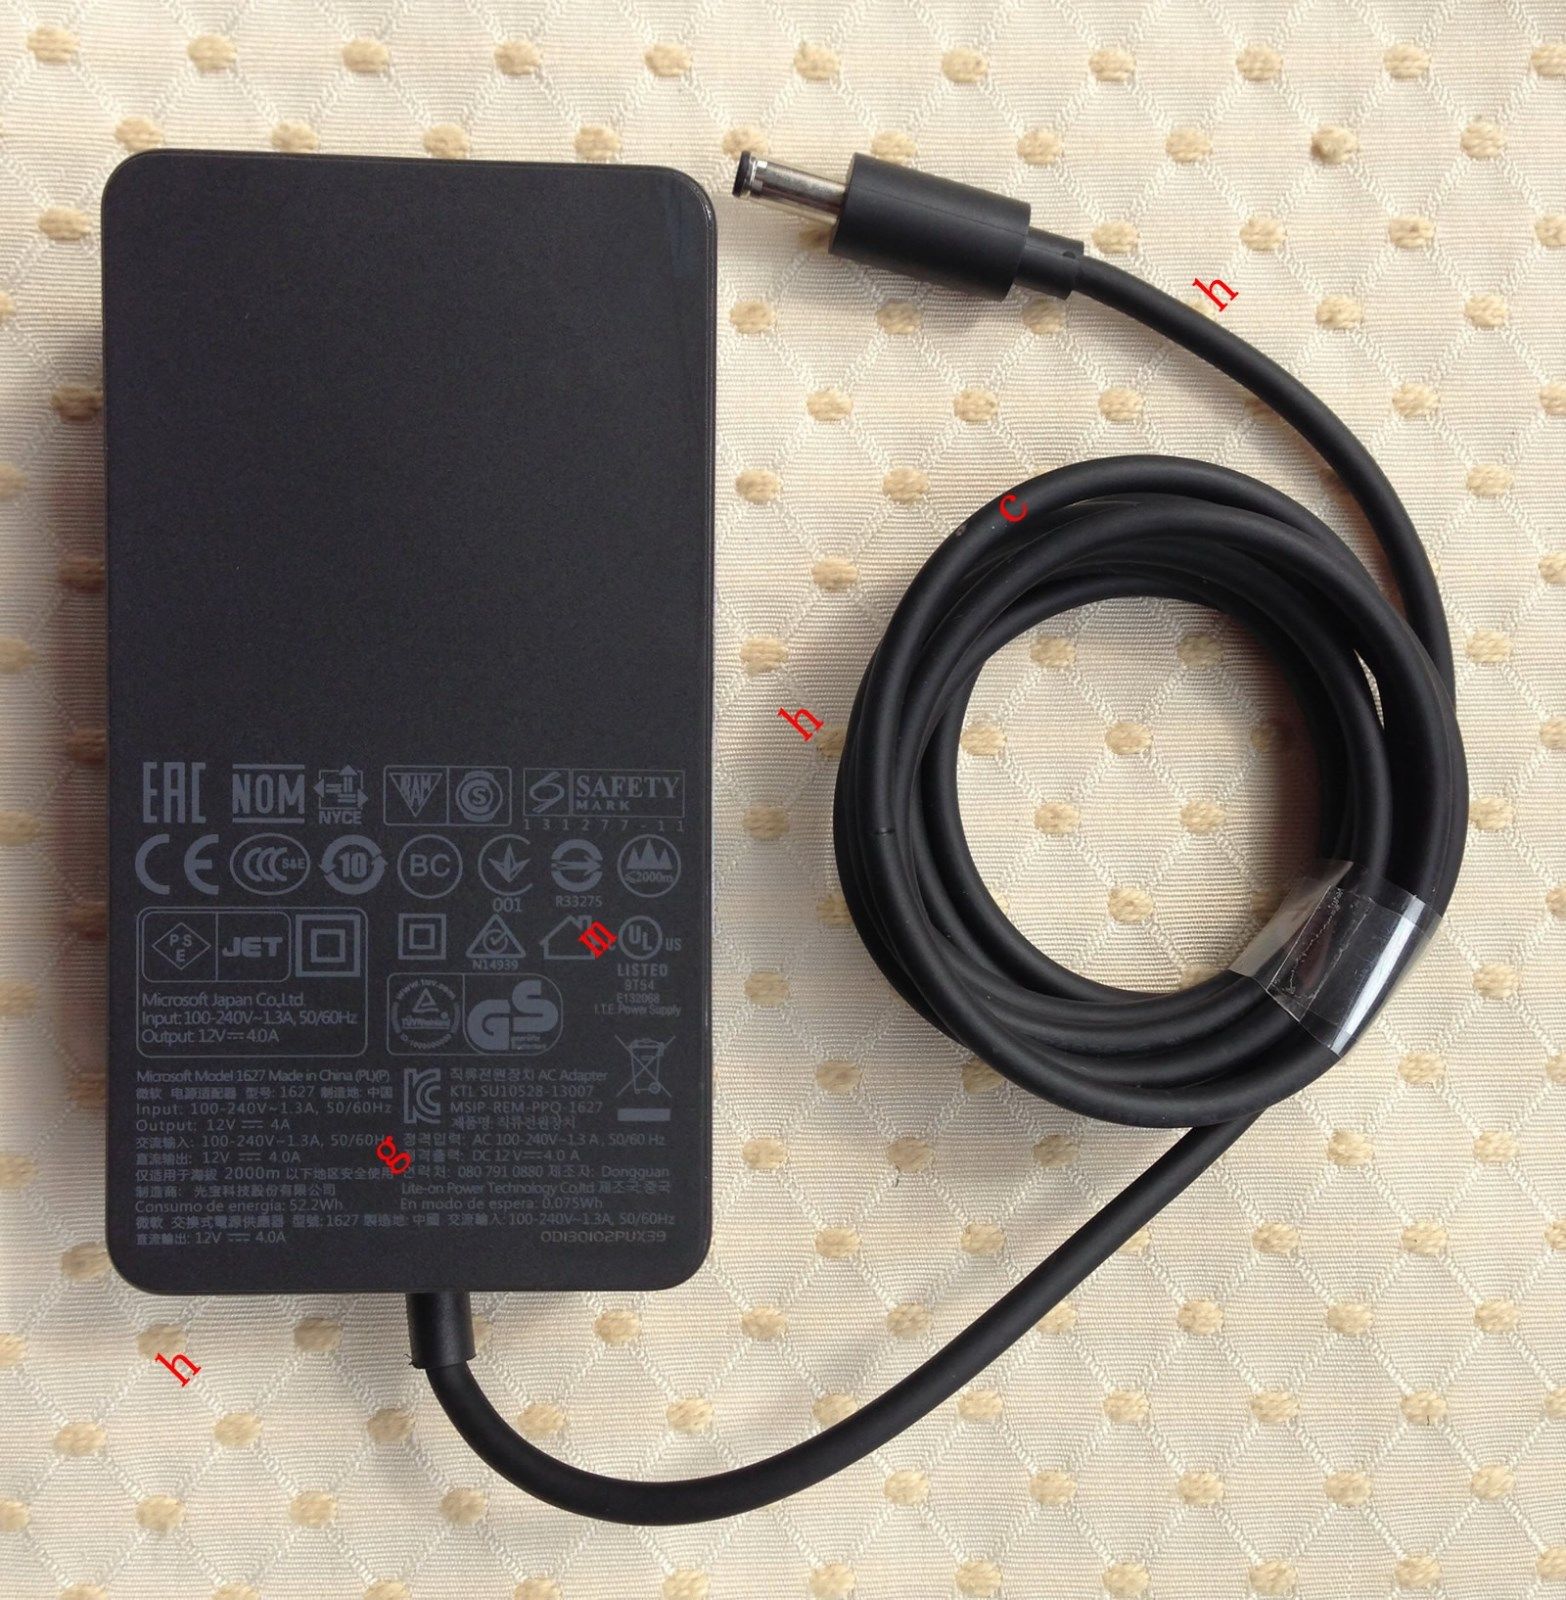 Microsoft 1627 48W 12V AC Adapter for Surface Pro 3 Docking Stat